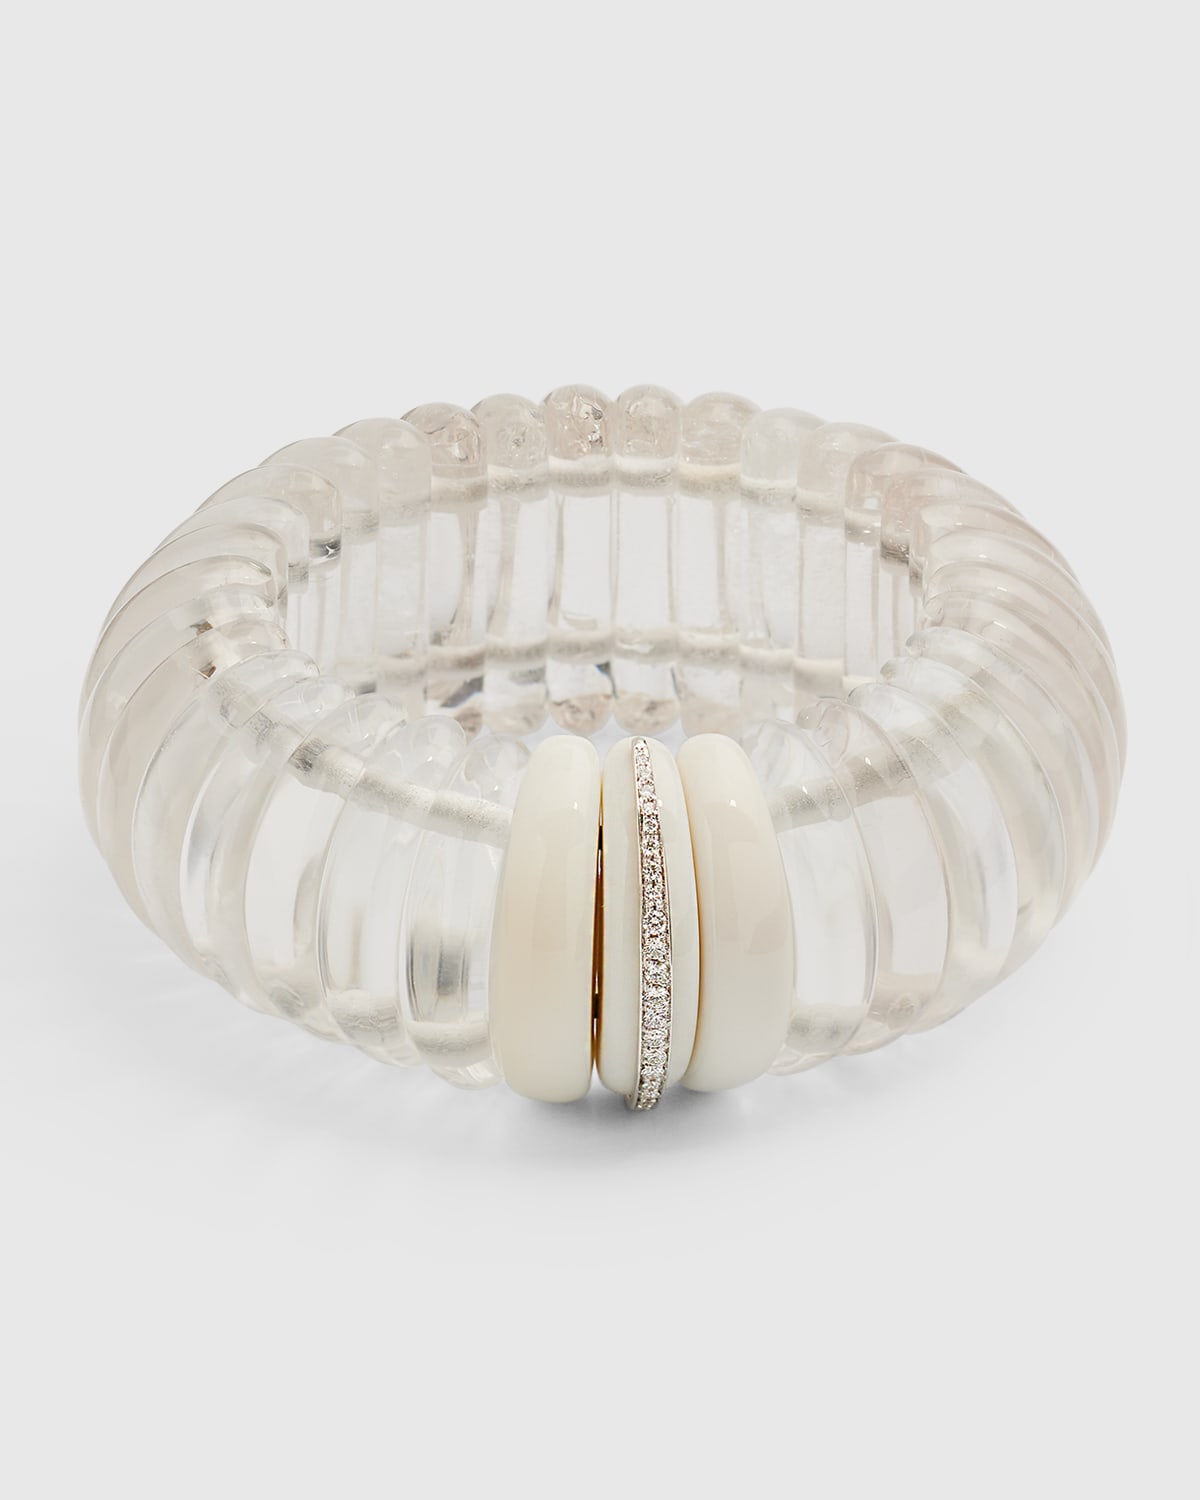 18K White Gold Expandable Spicchio Bracelet with Rock Crystals, White Agate and Diamonds